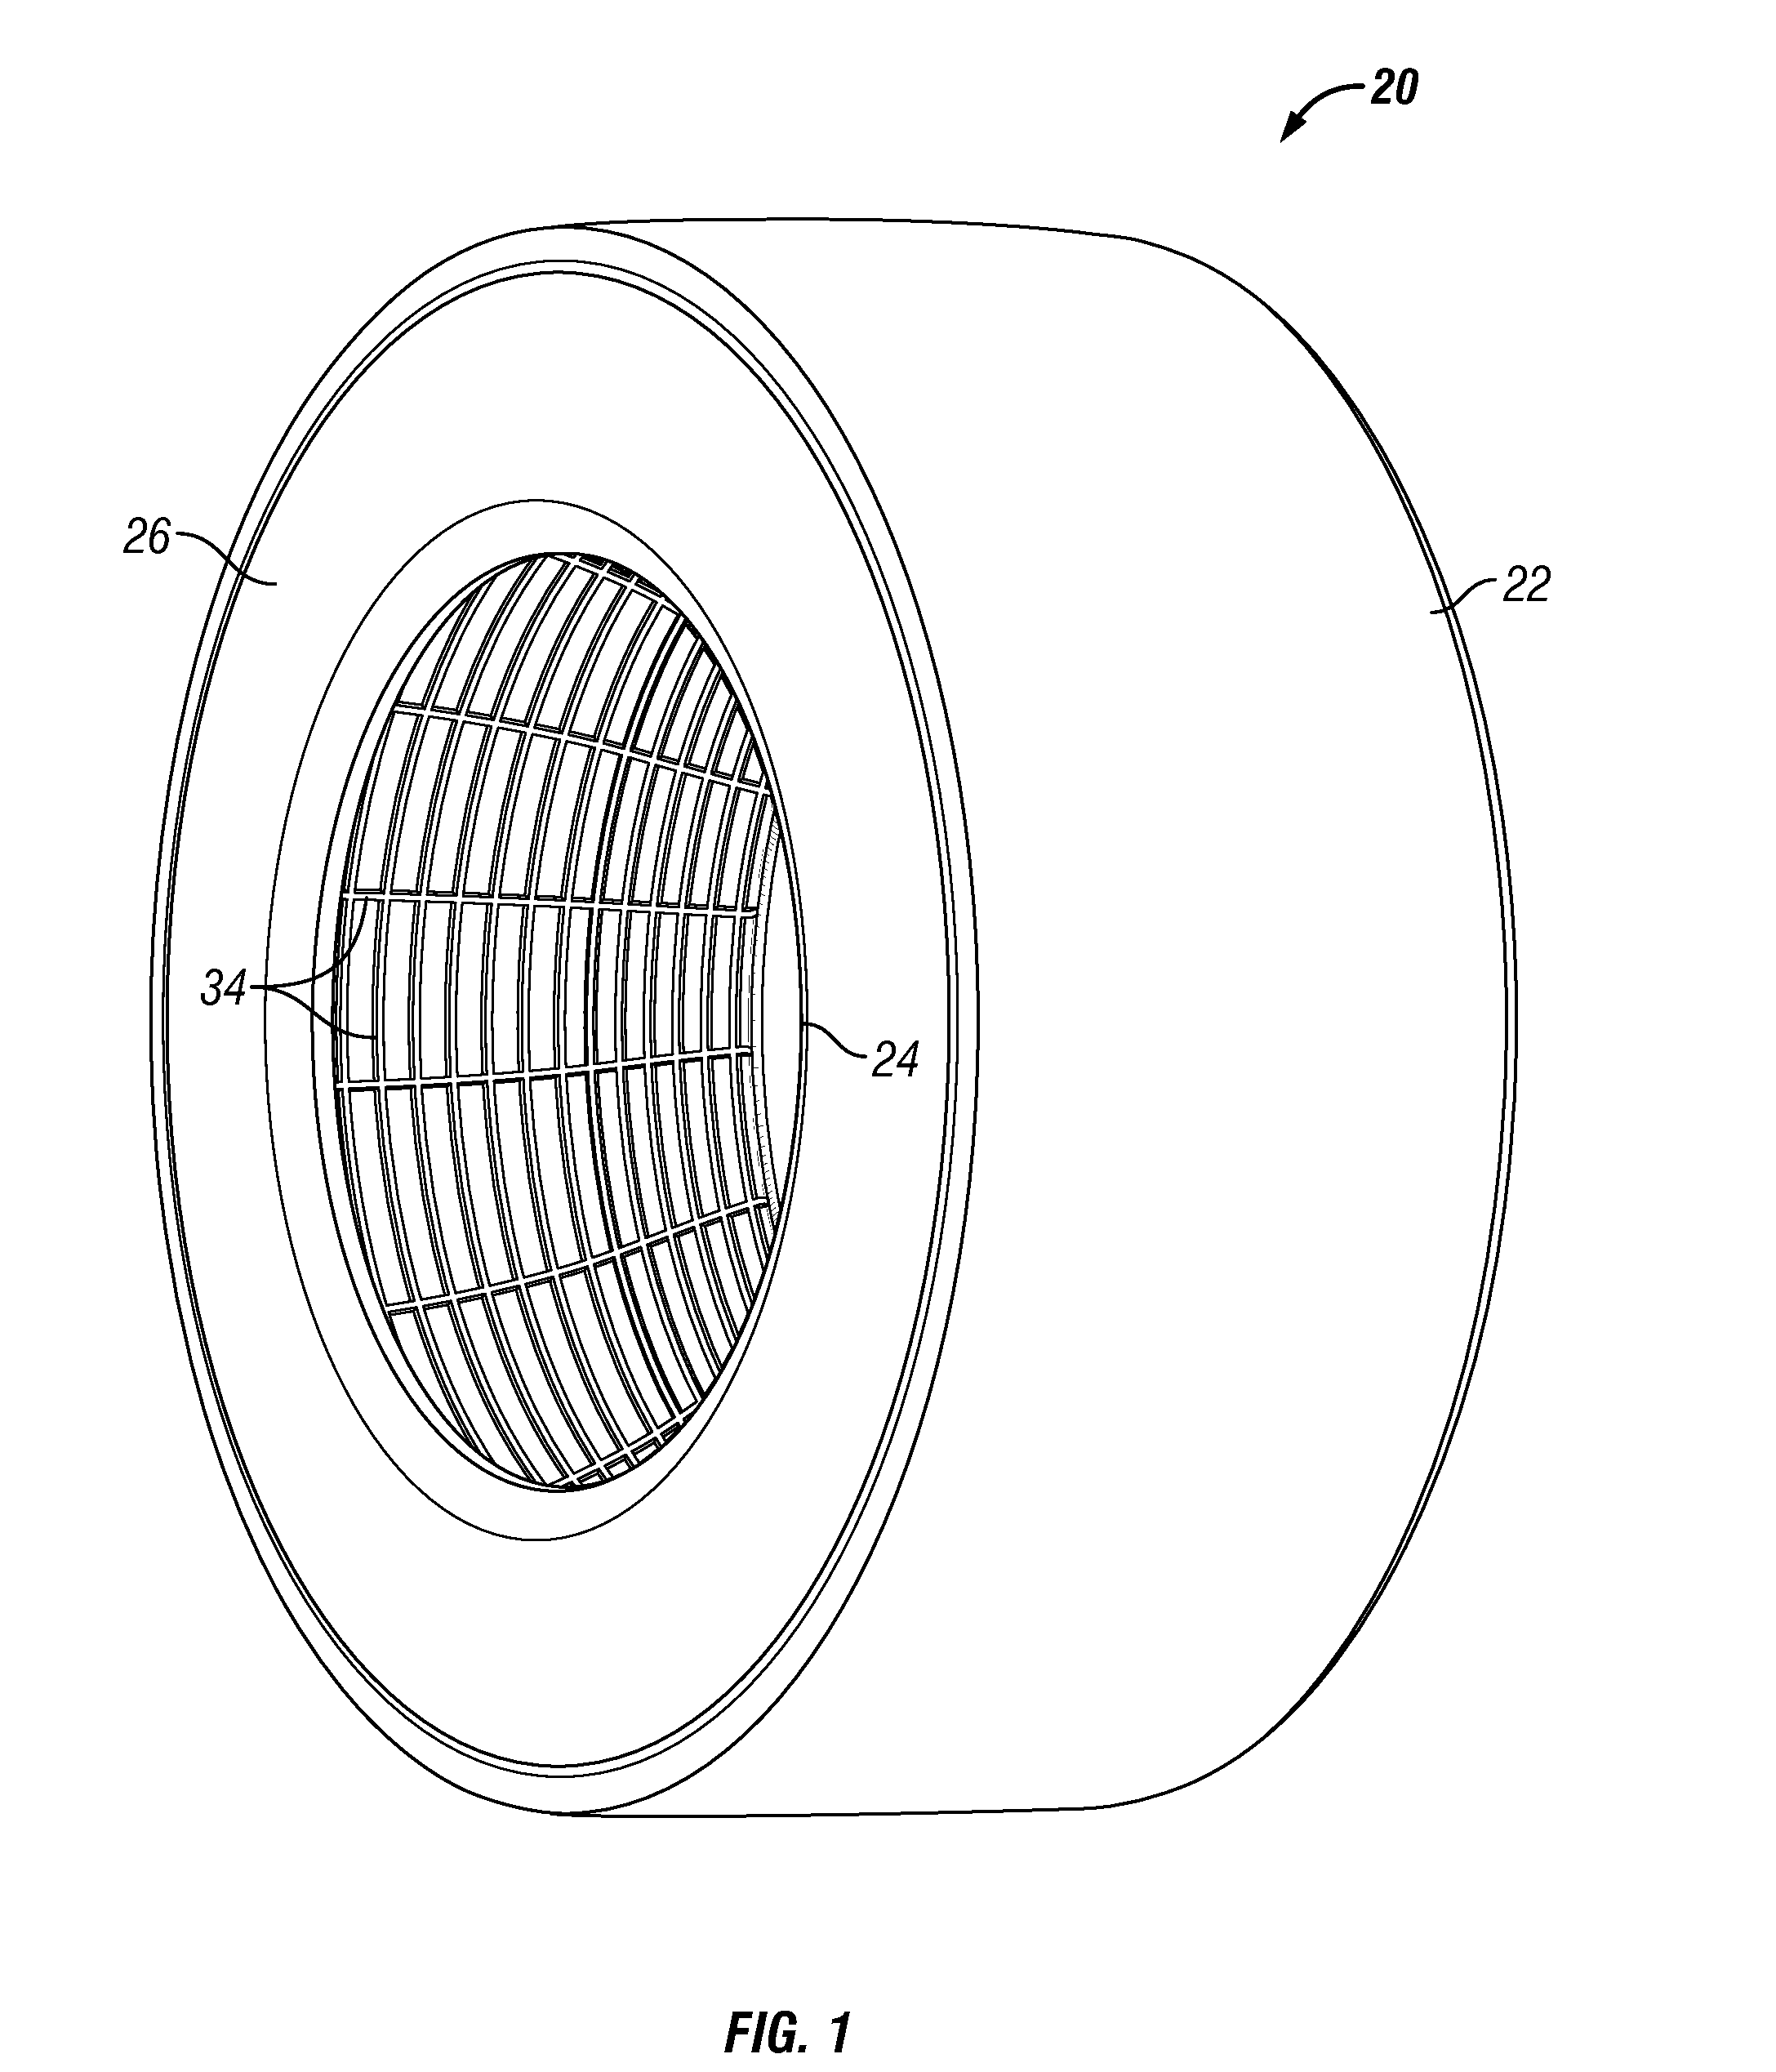 Tire design for ease of inner liner removal and method there for